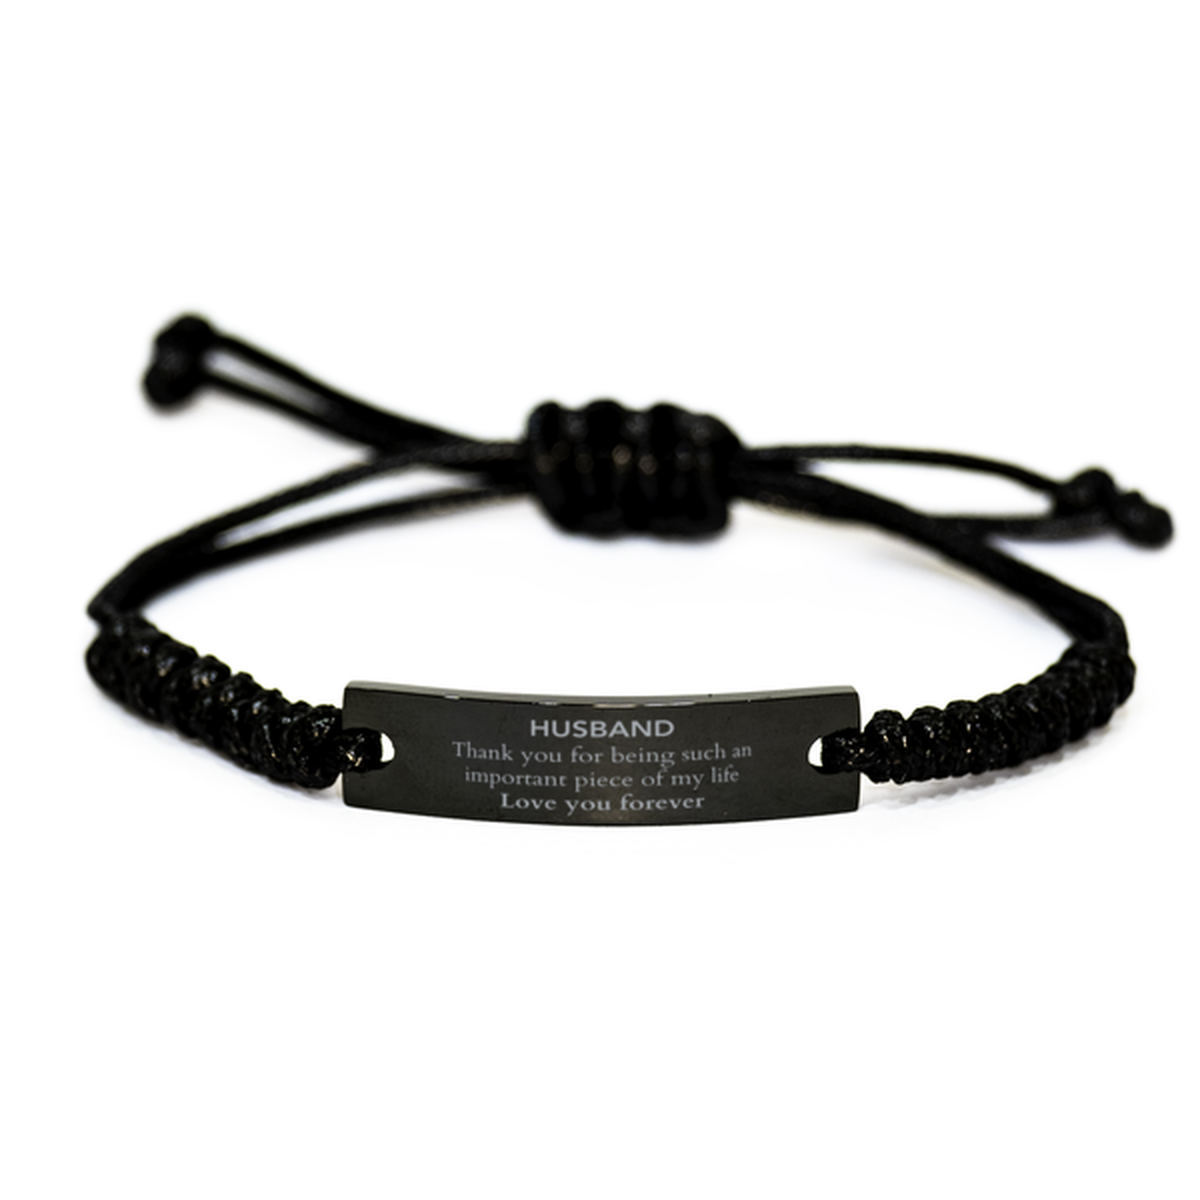 Appropriate Husband Black Rope Bracelet Epic Birthday Gifts for Husband Thank you for being such an important piece of my life Husband Christmas Mothers Fathers Day